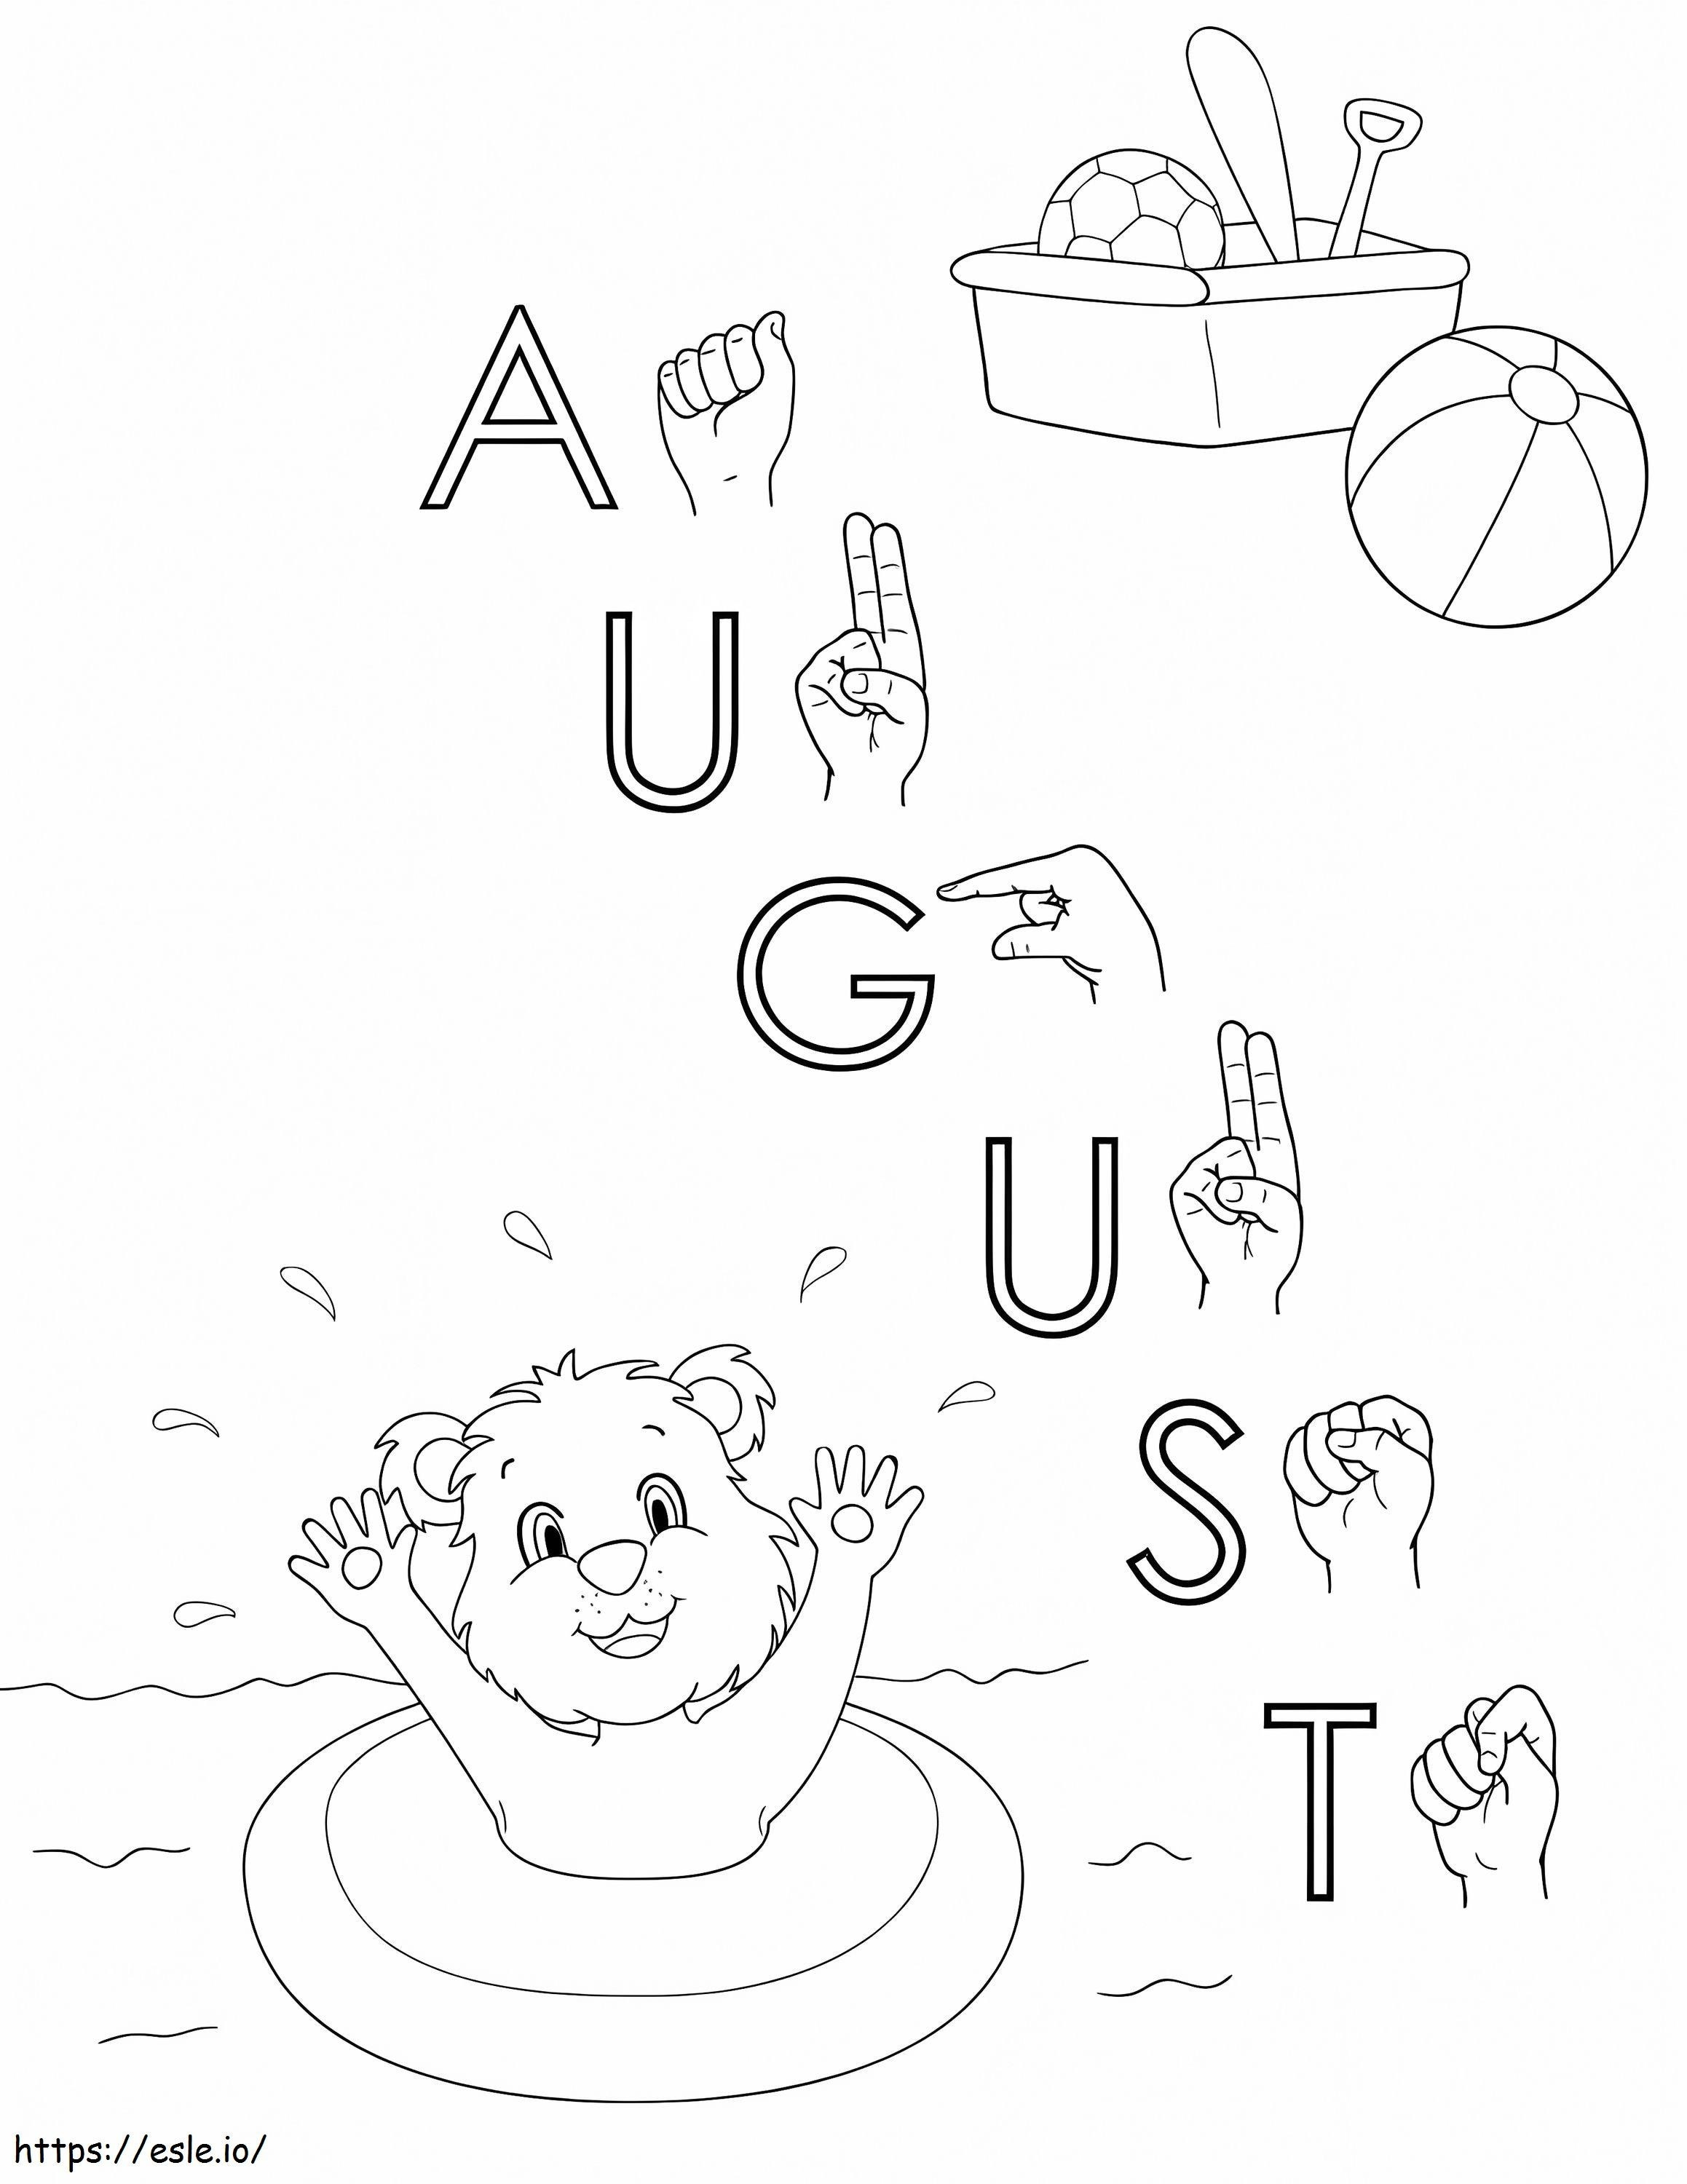 August 5 coloring page